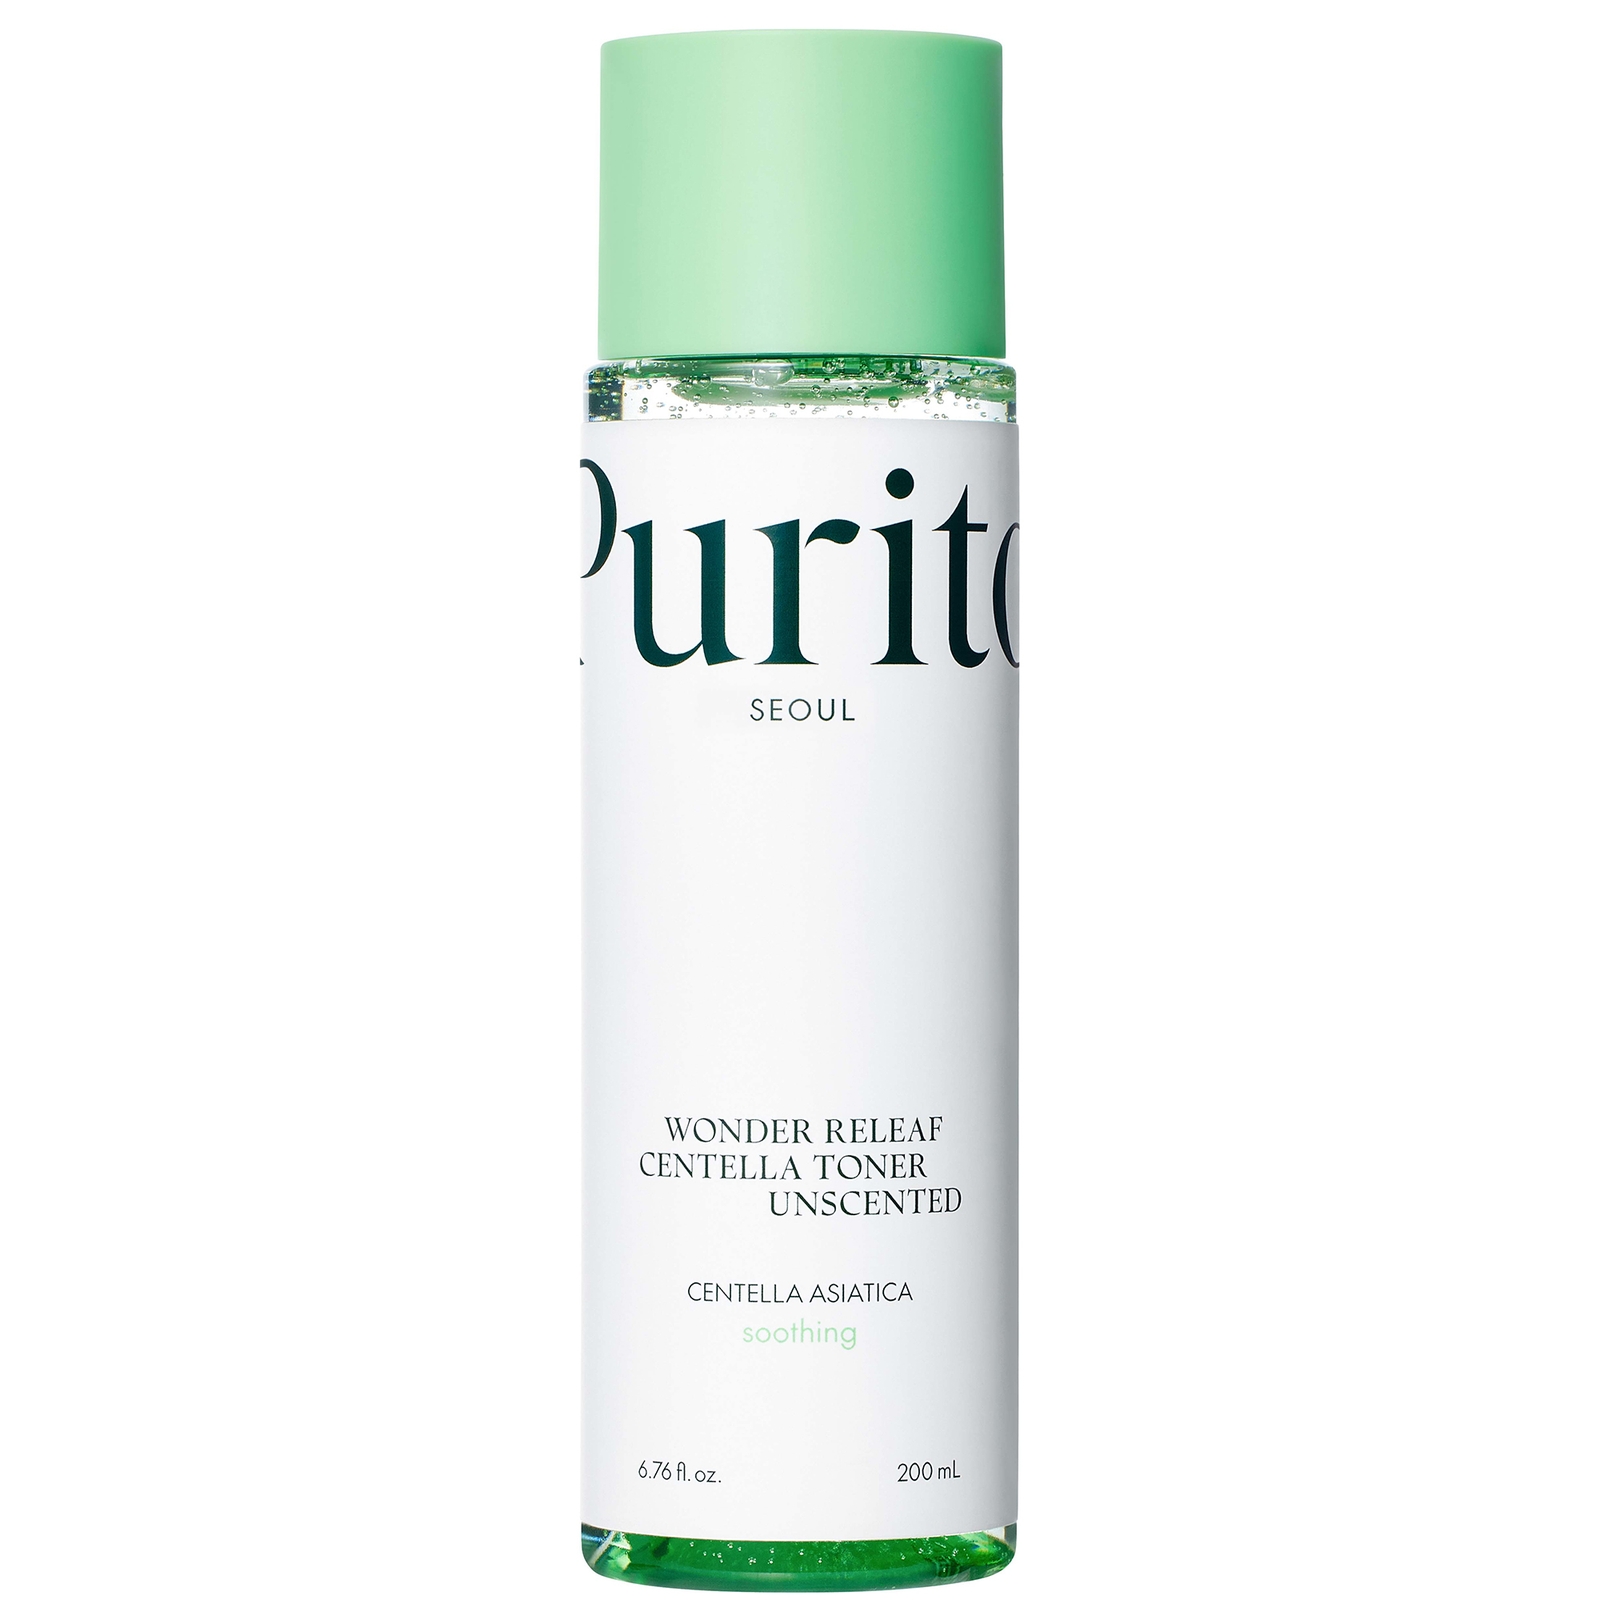 Photos - Facial / Body Cleansing Product Purito Wonder Releaf Centella Unscented Toner 200ml PU0061 